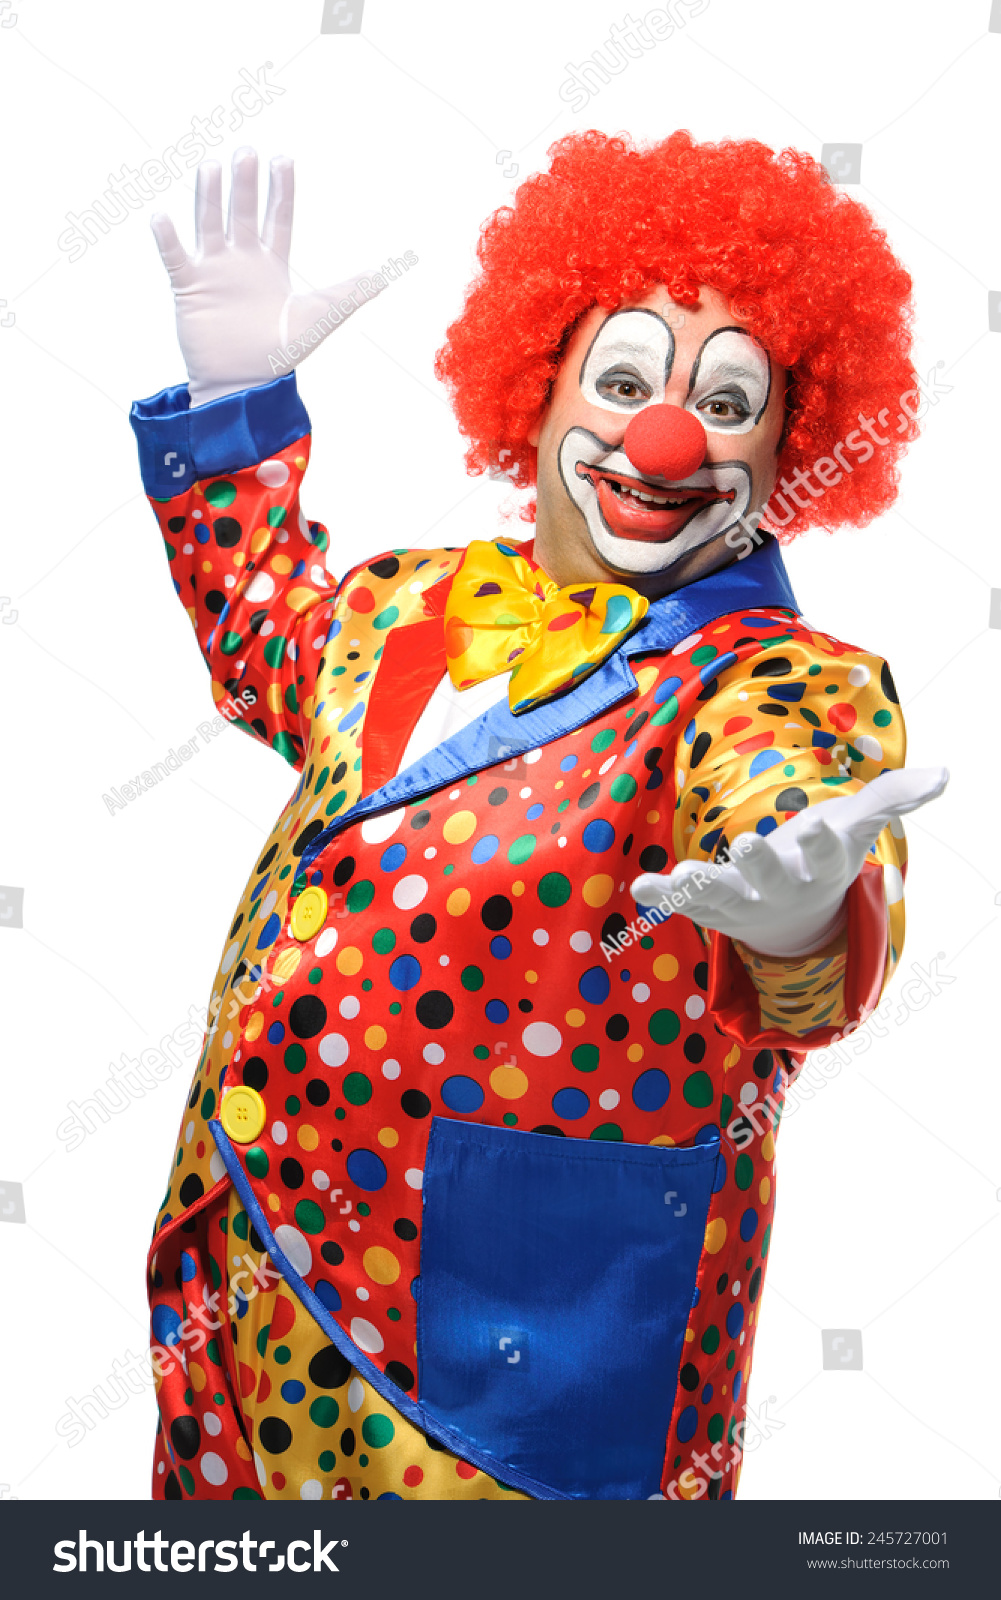 Portrait of a smiling clown isolated on white #245727001